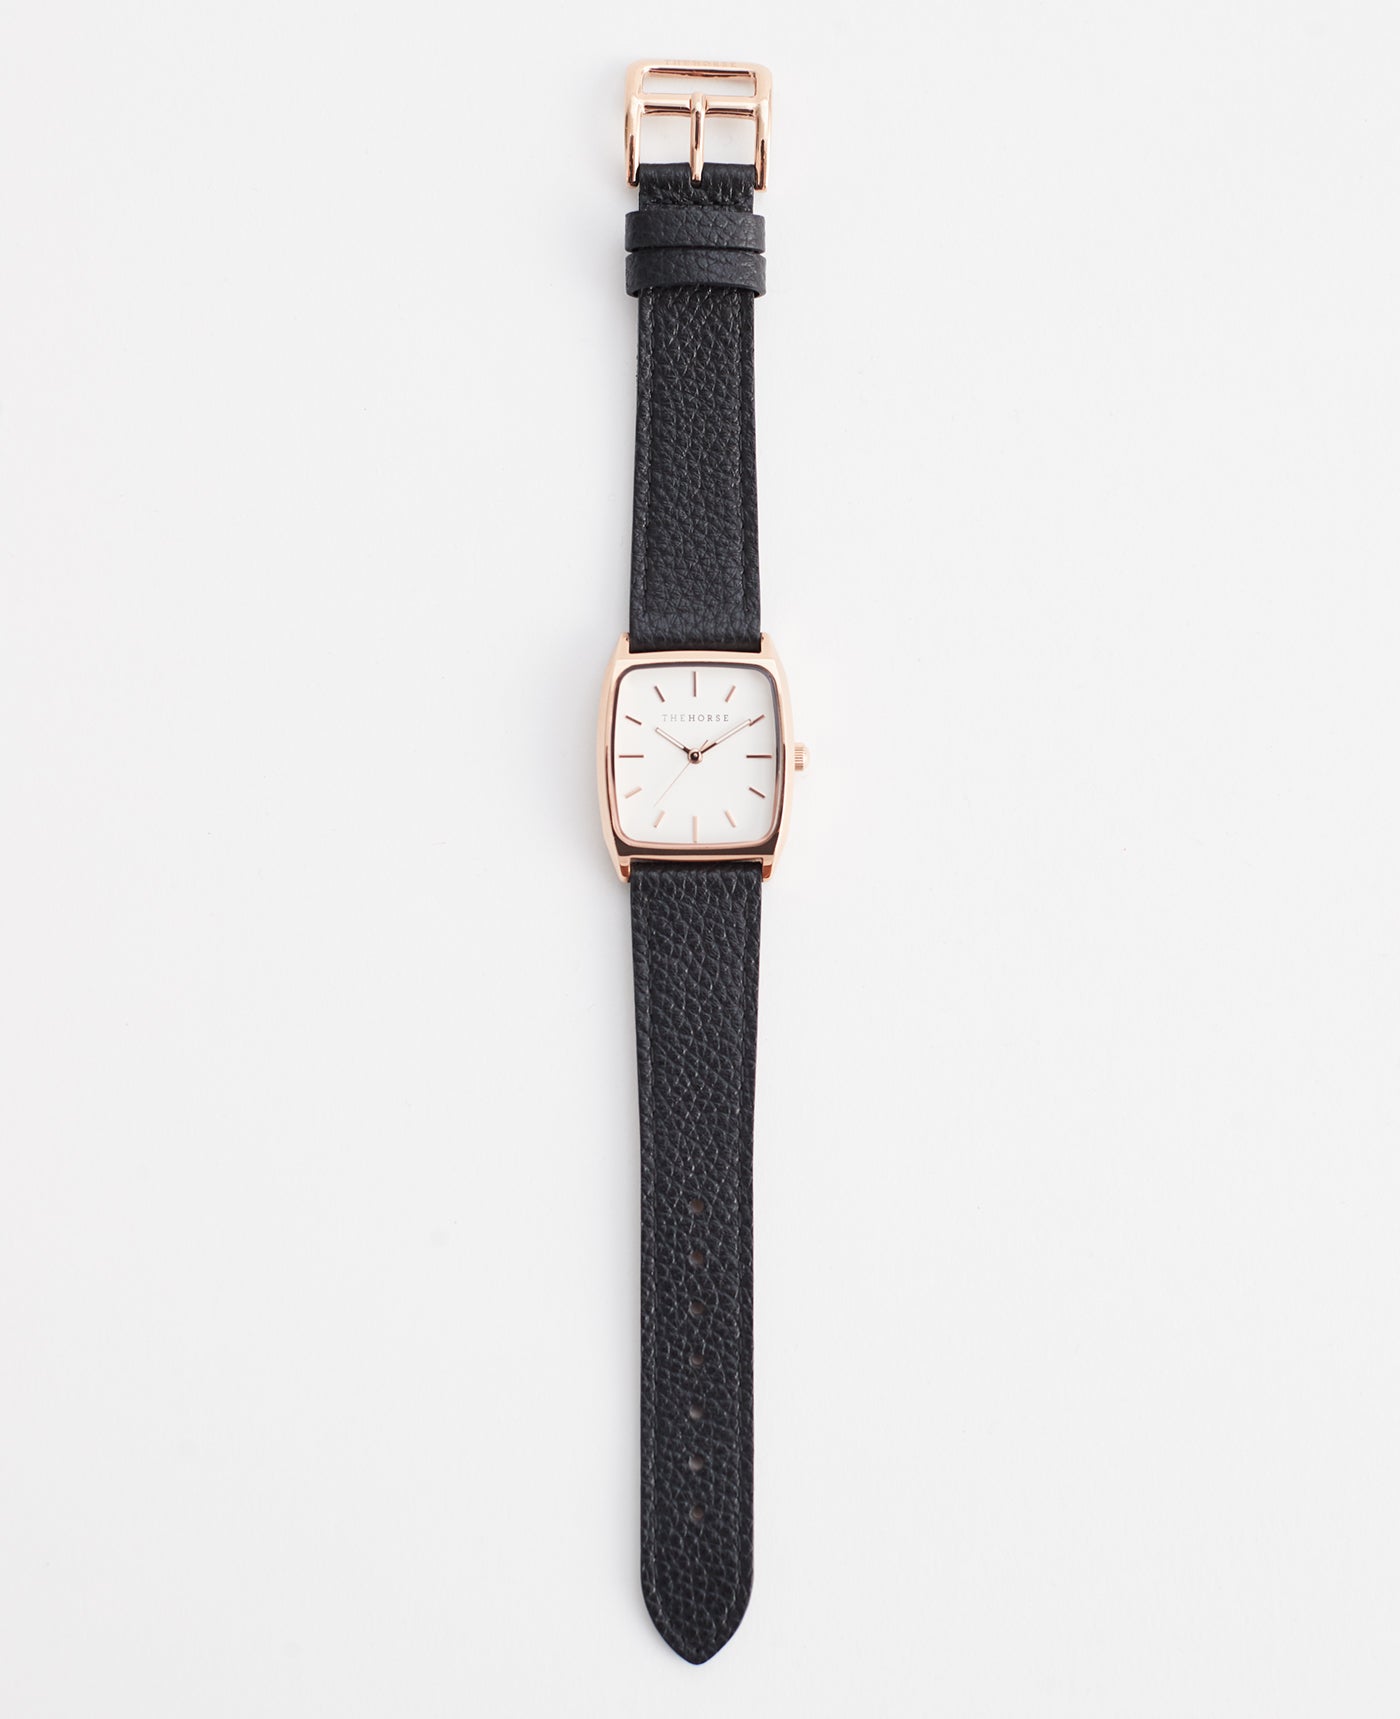 The Dress Watch: Rose Gold Case / White Dial / Black Leather Strap